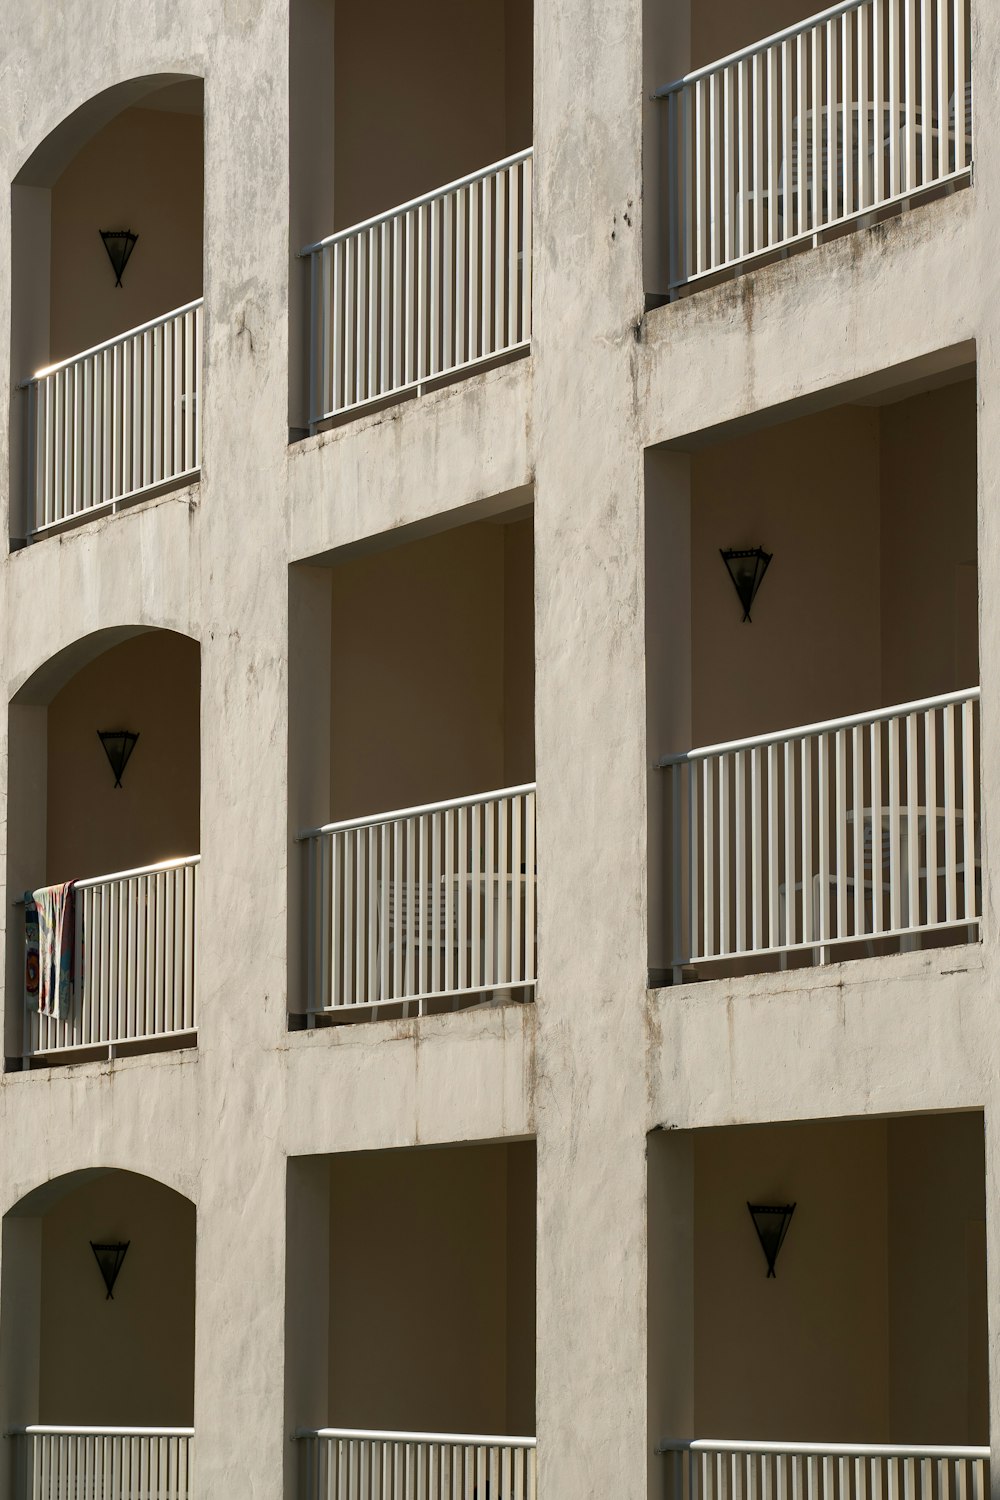 an apartment building with balconies and balconies on the balconies